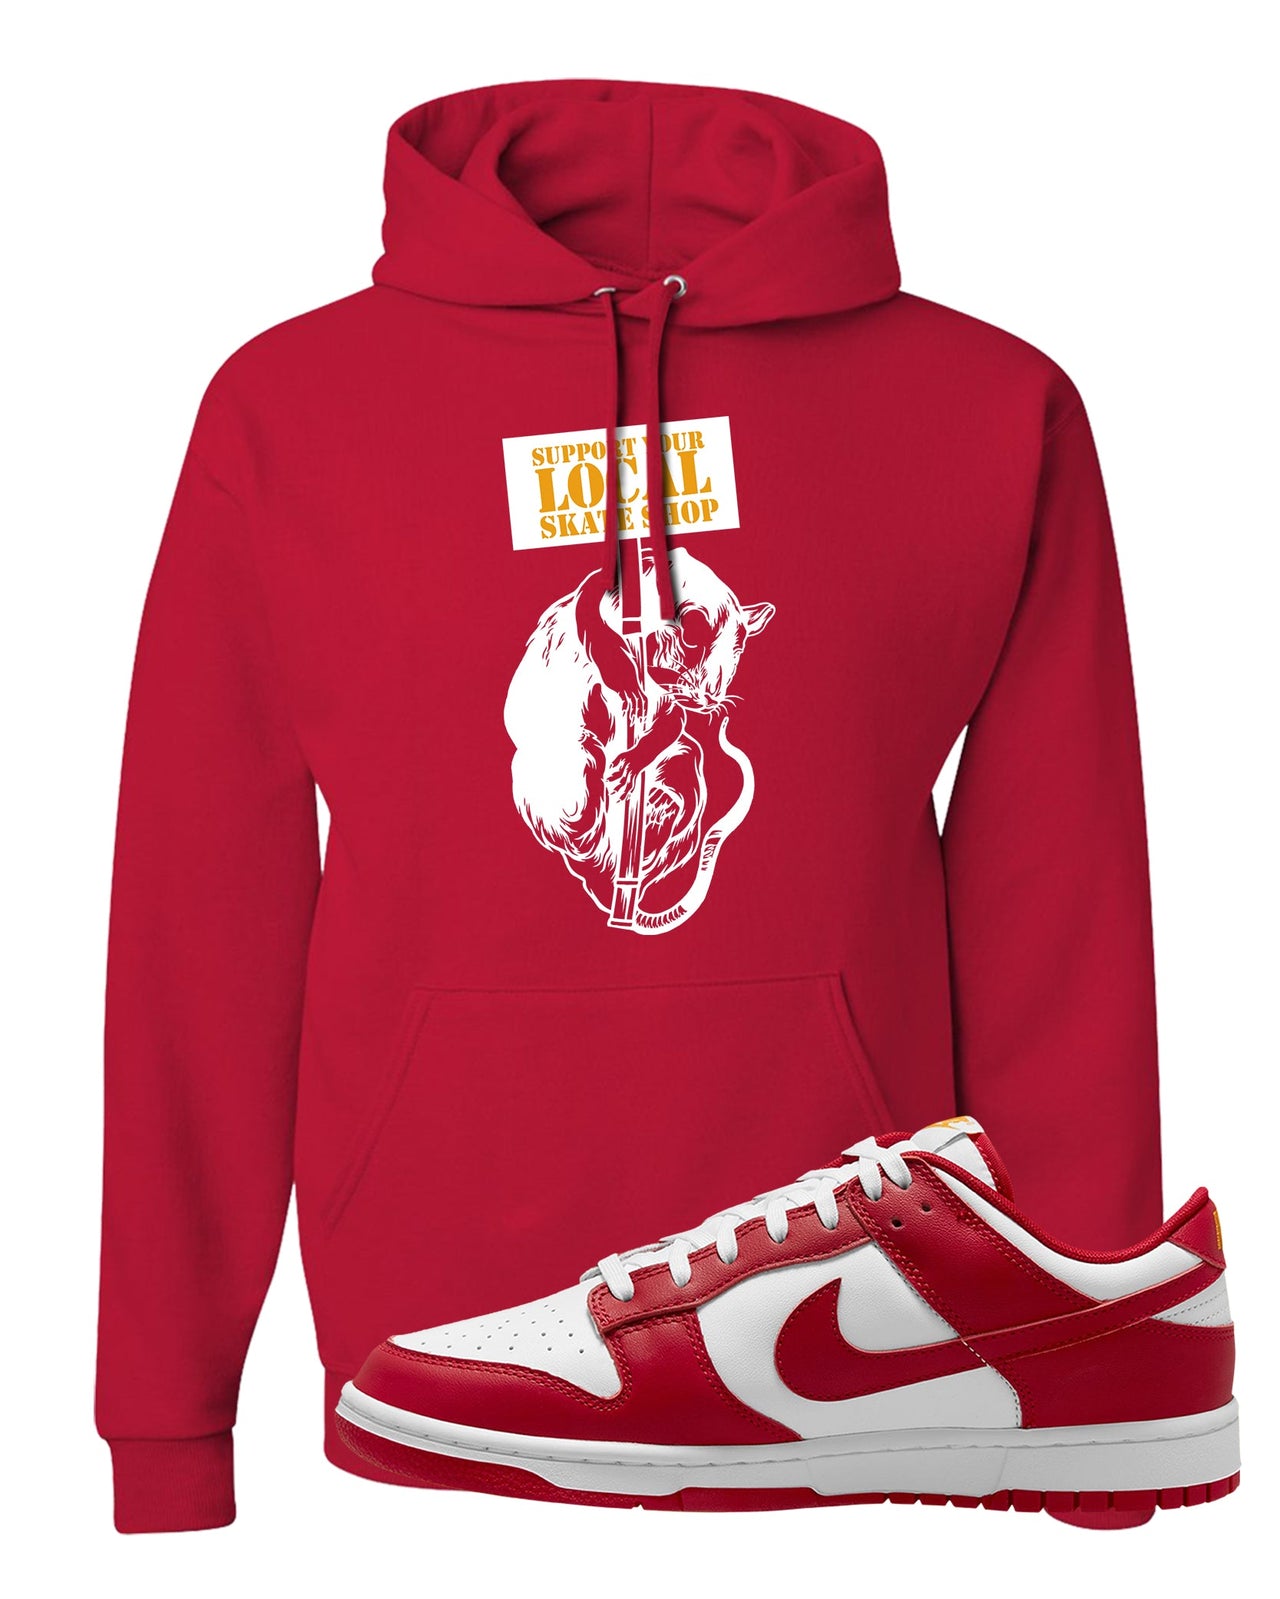 Red White Yellow Low Dunks Hoodie | Support Your Local Skate Shop, Red